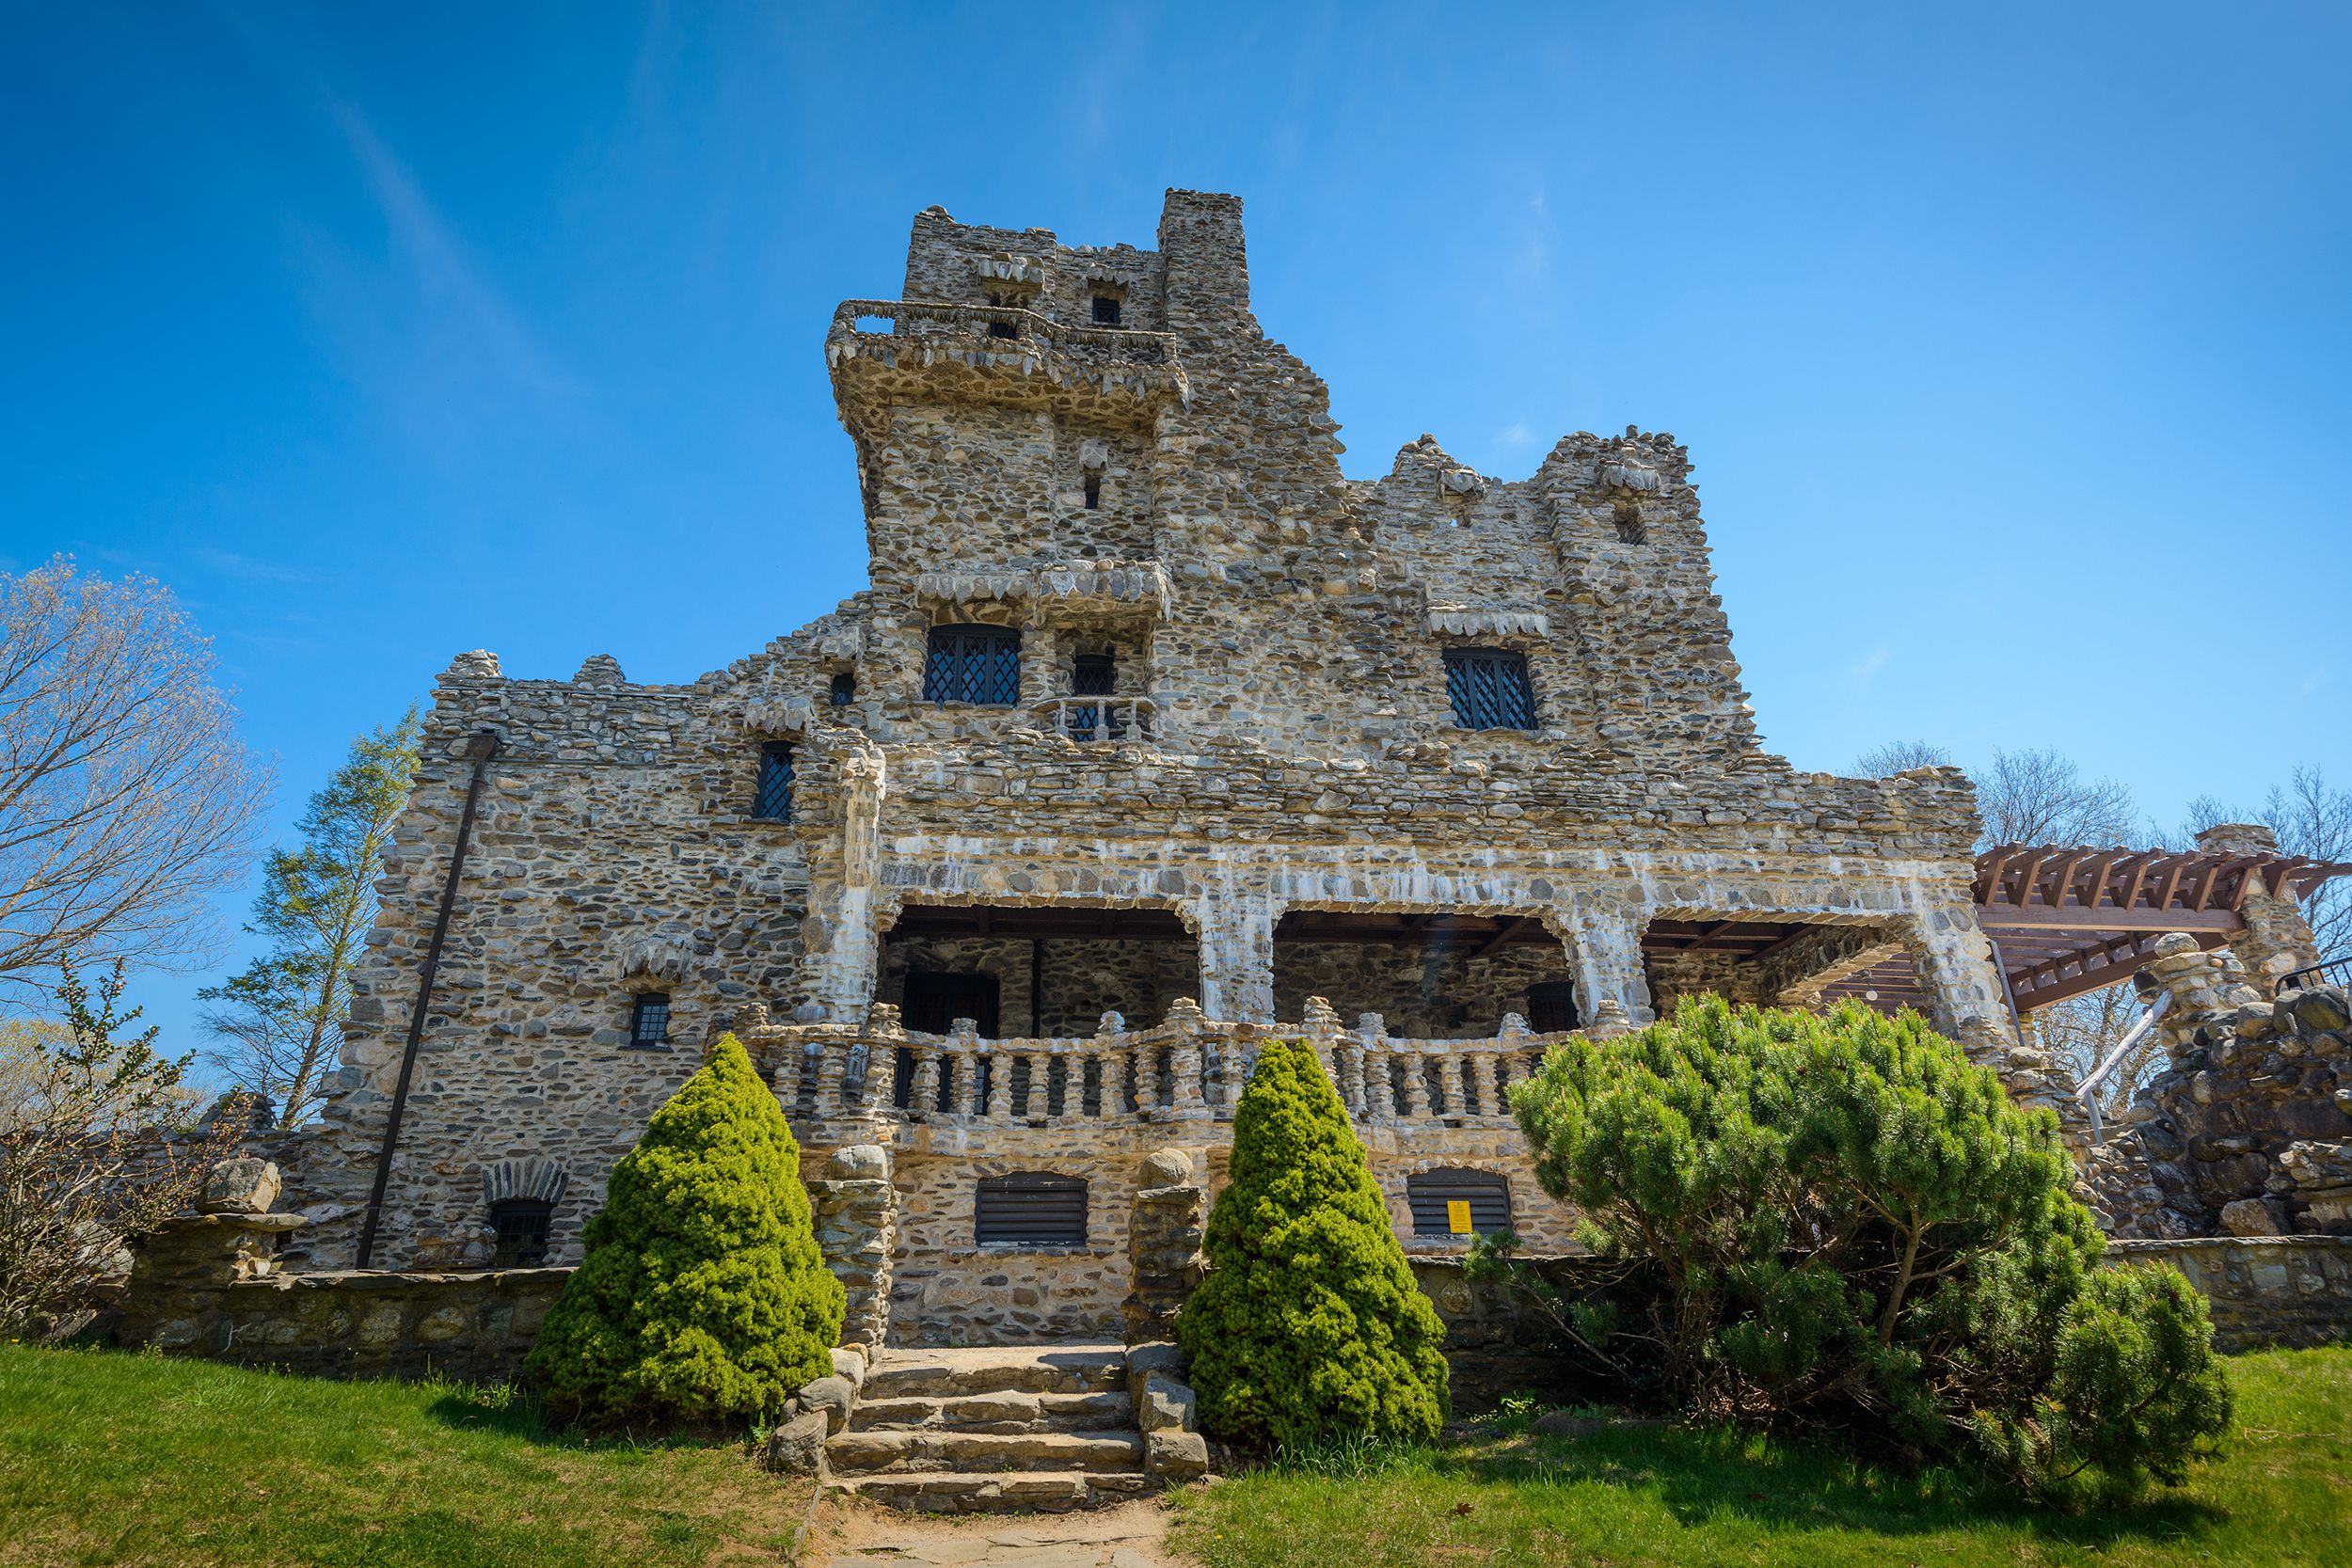 <p>The <a href="https://www.ct.gov/deep/cwp/view.asp?a=2716&q=325204&deepNav_GID=1650%20">Gillette Castle State Park</a> in East Haddam boasts a 24-room mansion that looks like a medieval castle. Completed in 1919, the state of Connecticut bought the grounds and castle from the estate of William Hooker Gillette (a distinguished thespian of the time) in 1943. The site is fun, interesting, and enjoyable for all ages, according to TripAdvisor reviews. Parking and entrance to the park are free, but there's a $6 fee for ages 13 and up and $2 for ages 6 to 12 to enter the castle.</p>